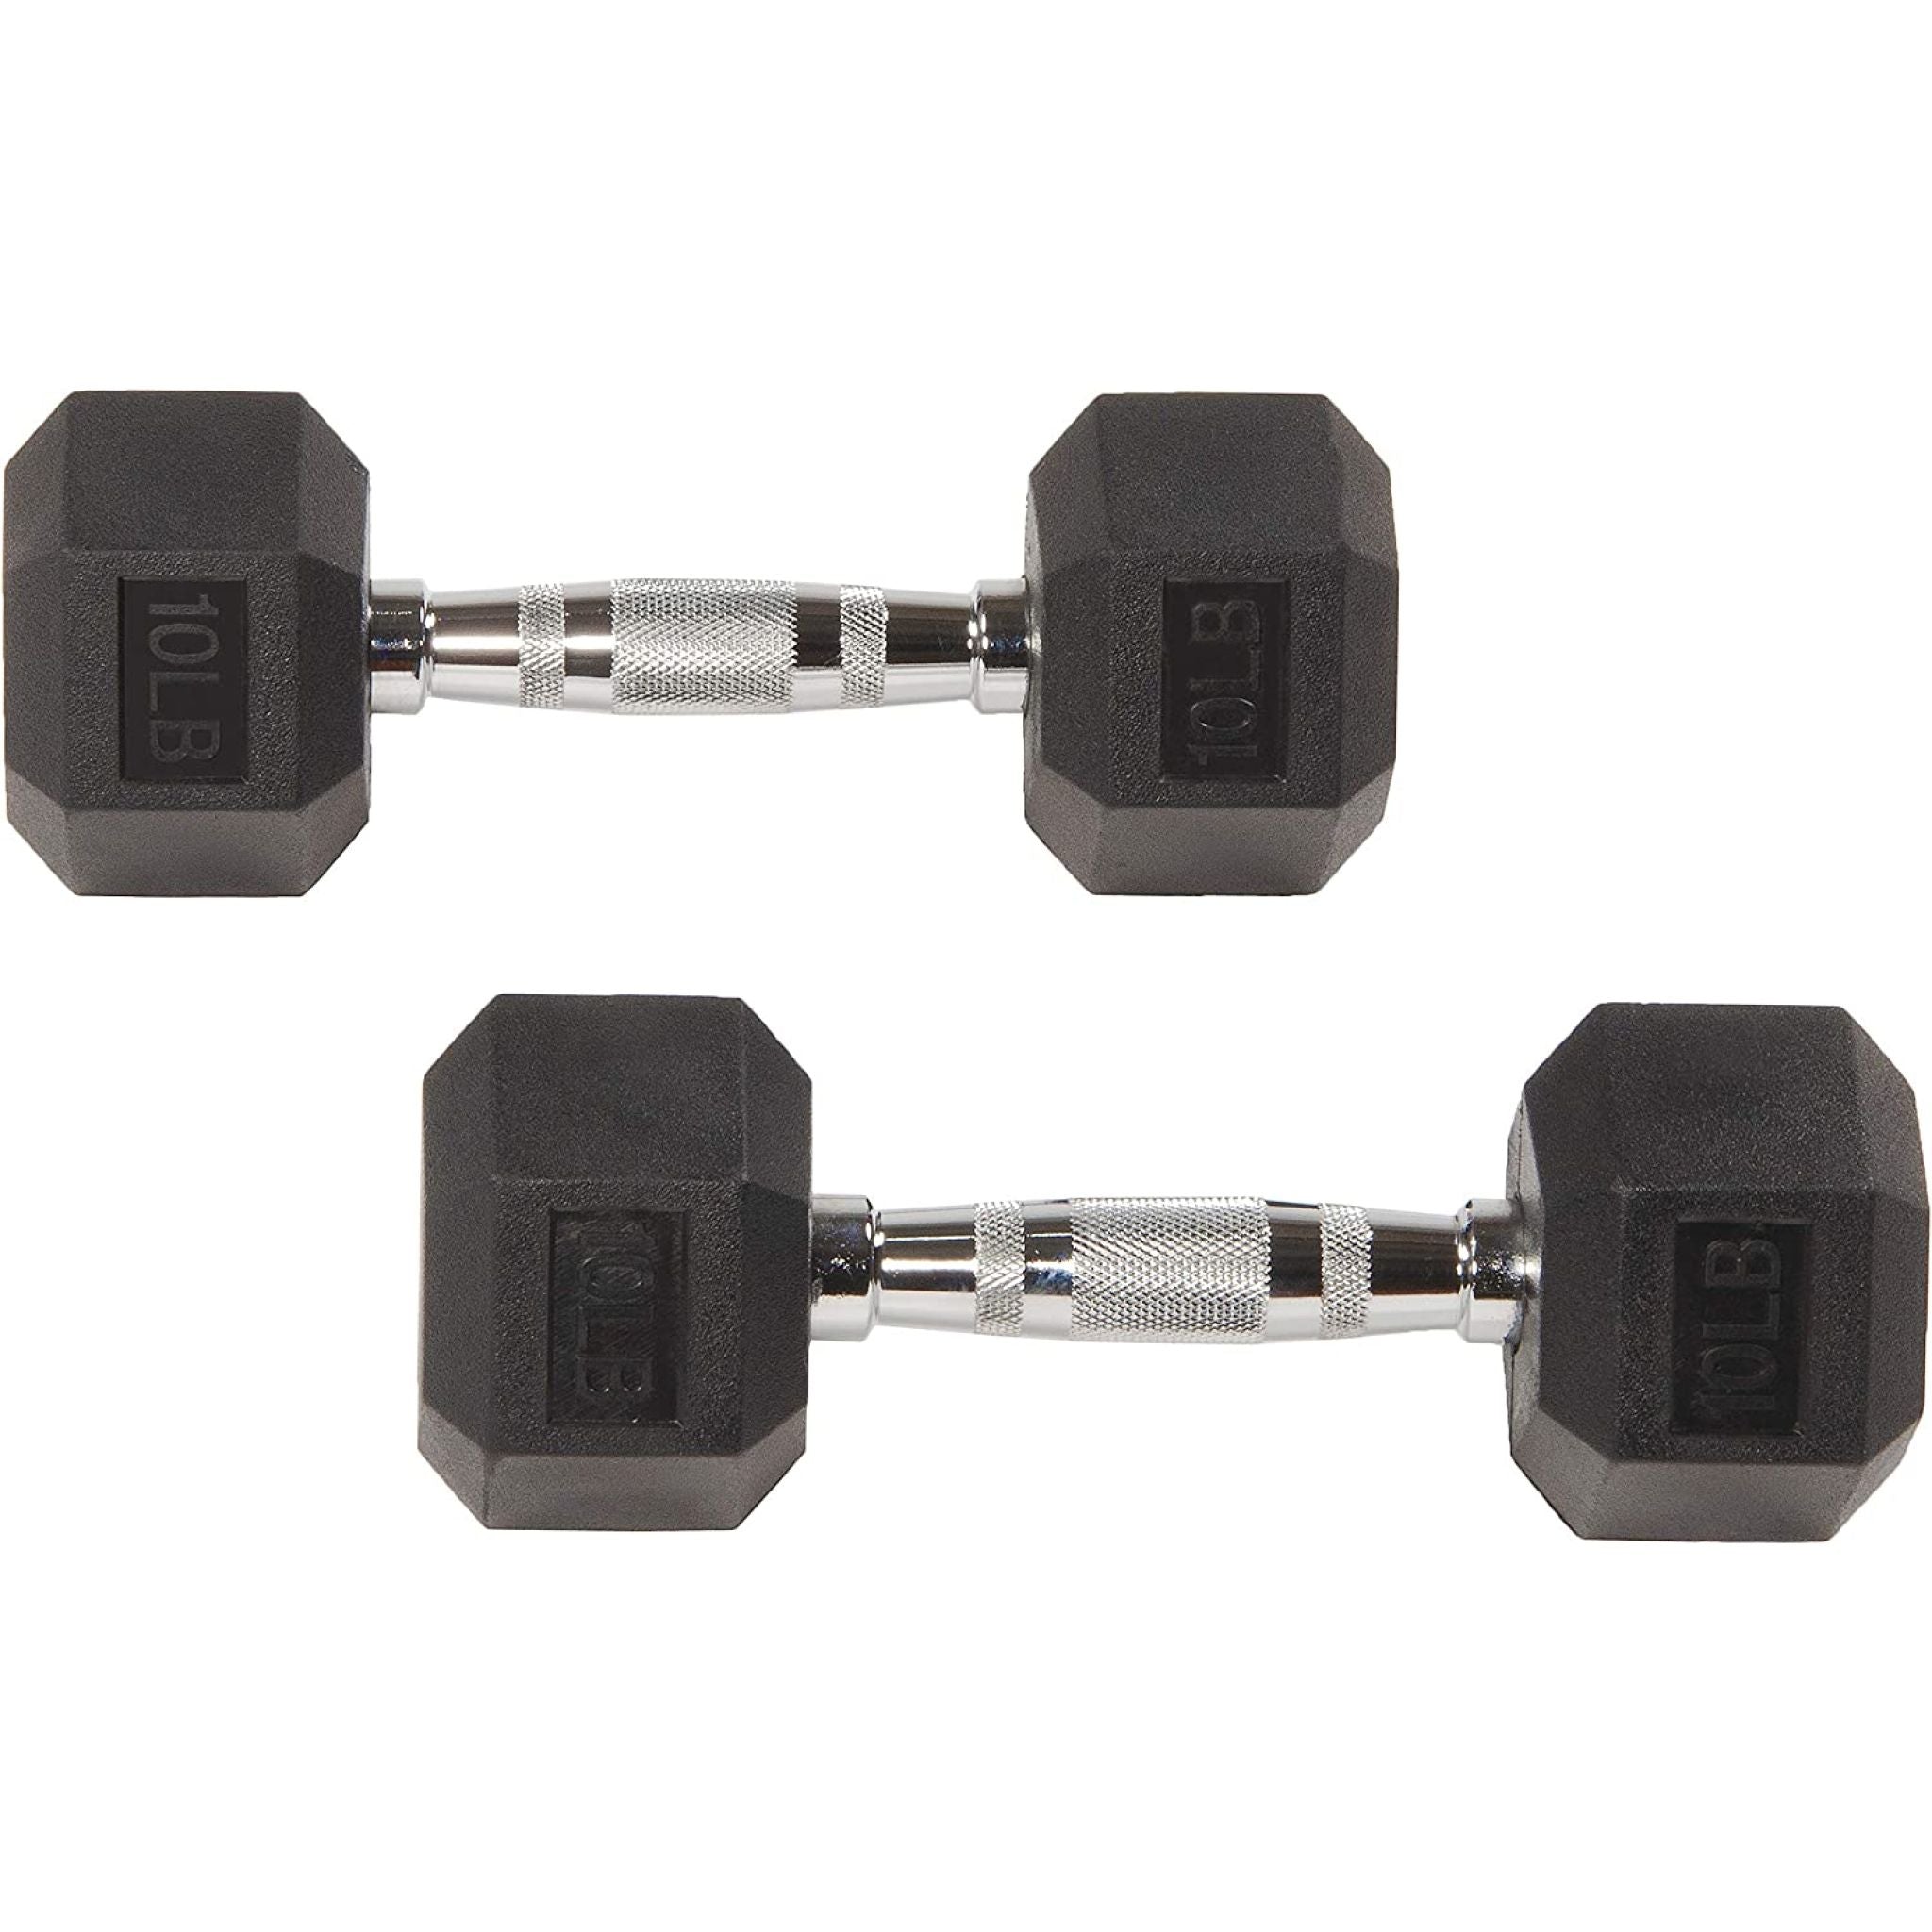 10Lb rubber hex dumbbells pair at Express Gym Supply